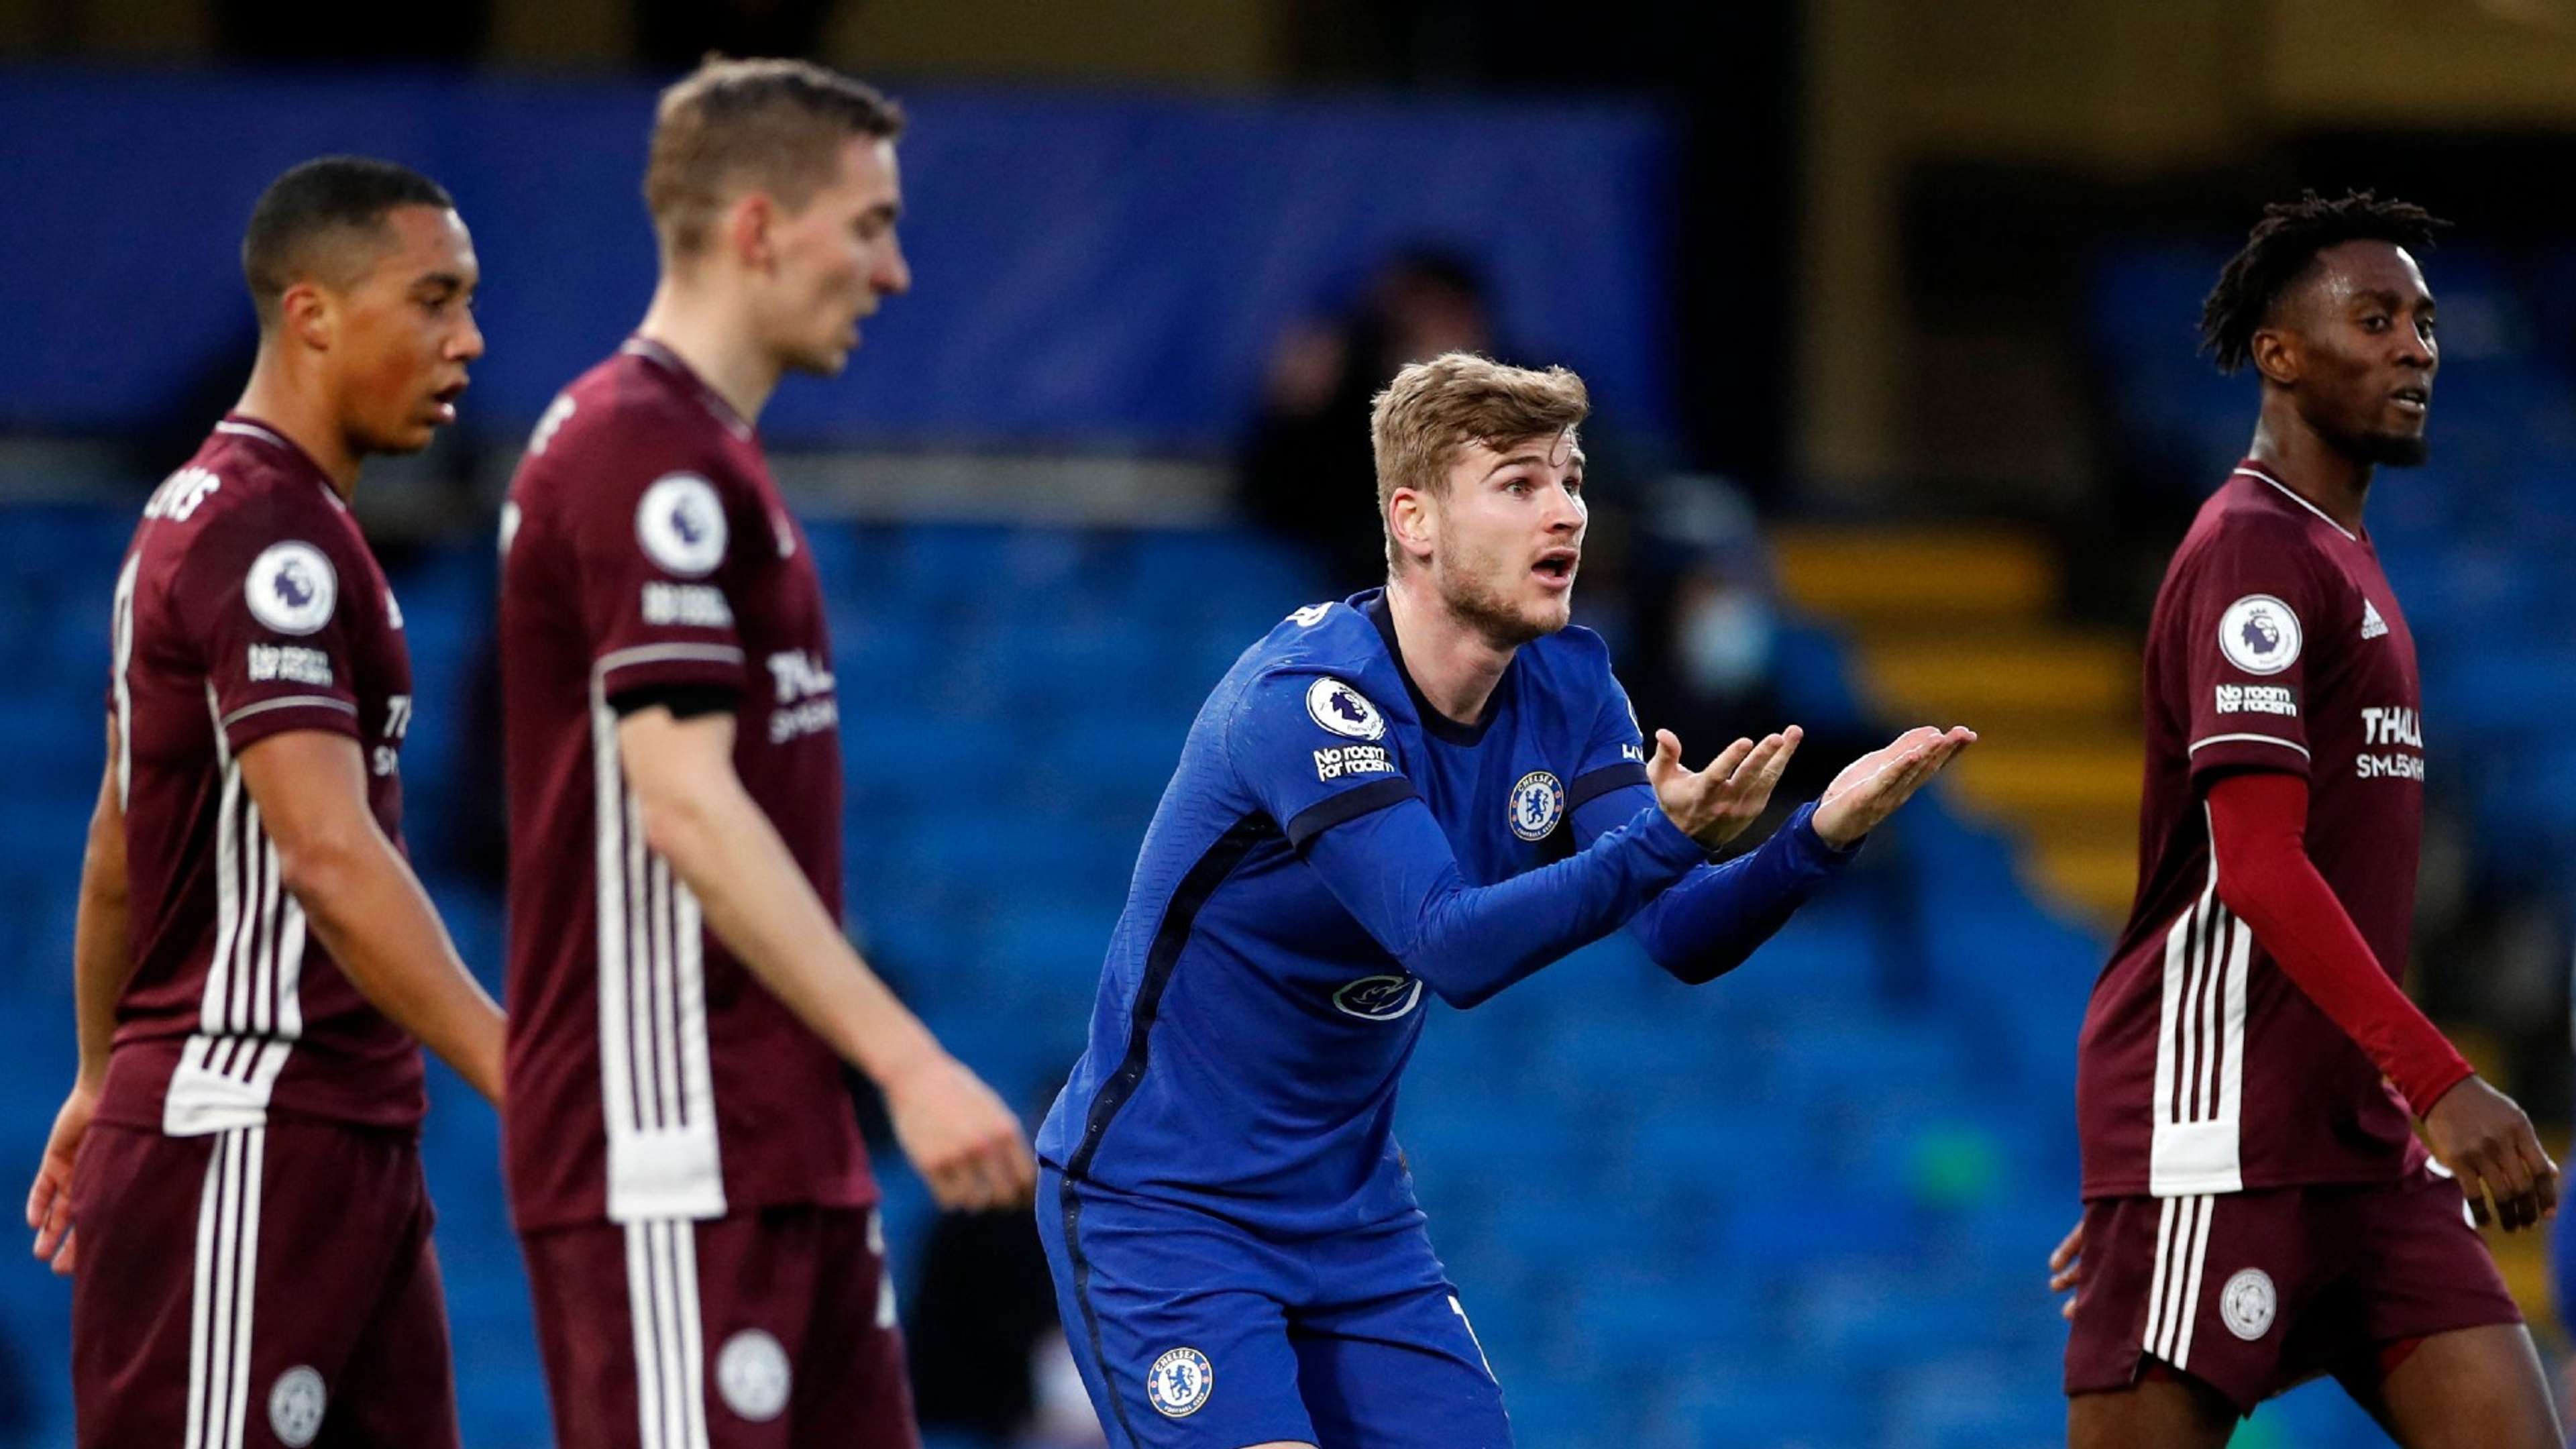 Chelsea vs Leicester Timo Werner Premier League 2020-21